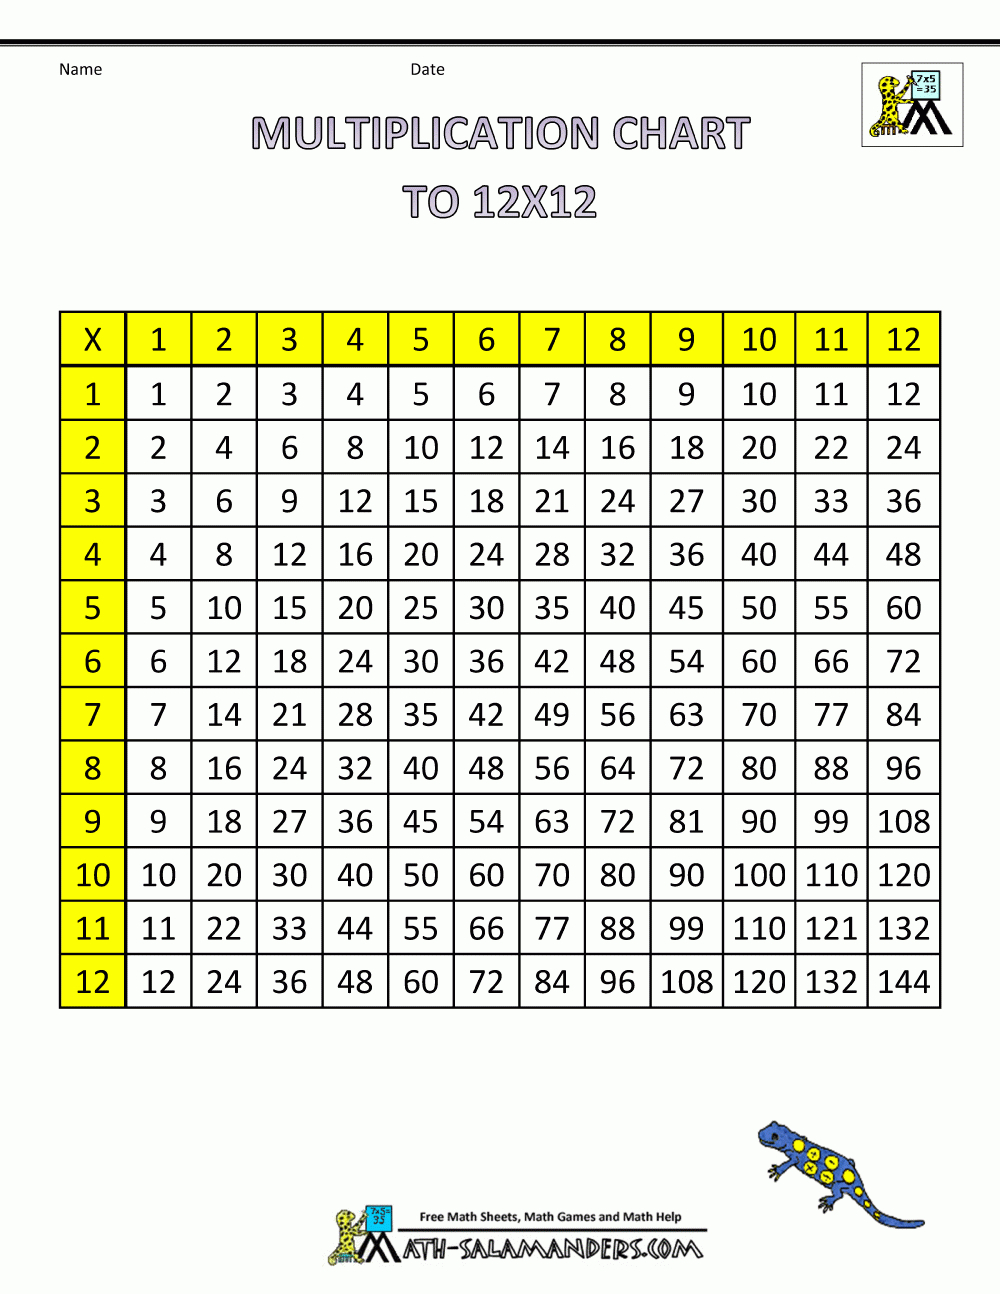 Times Table Grid To 12X12 - Free Printable Multiplication Table